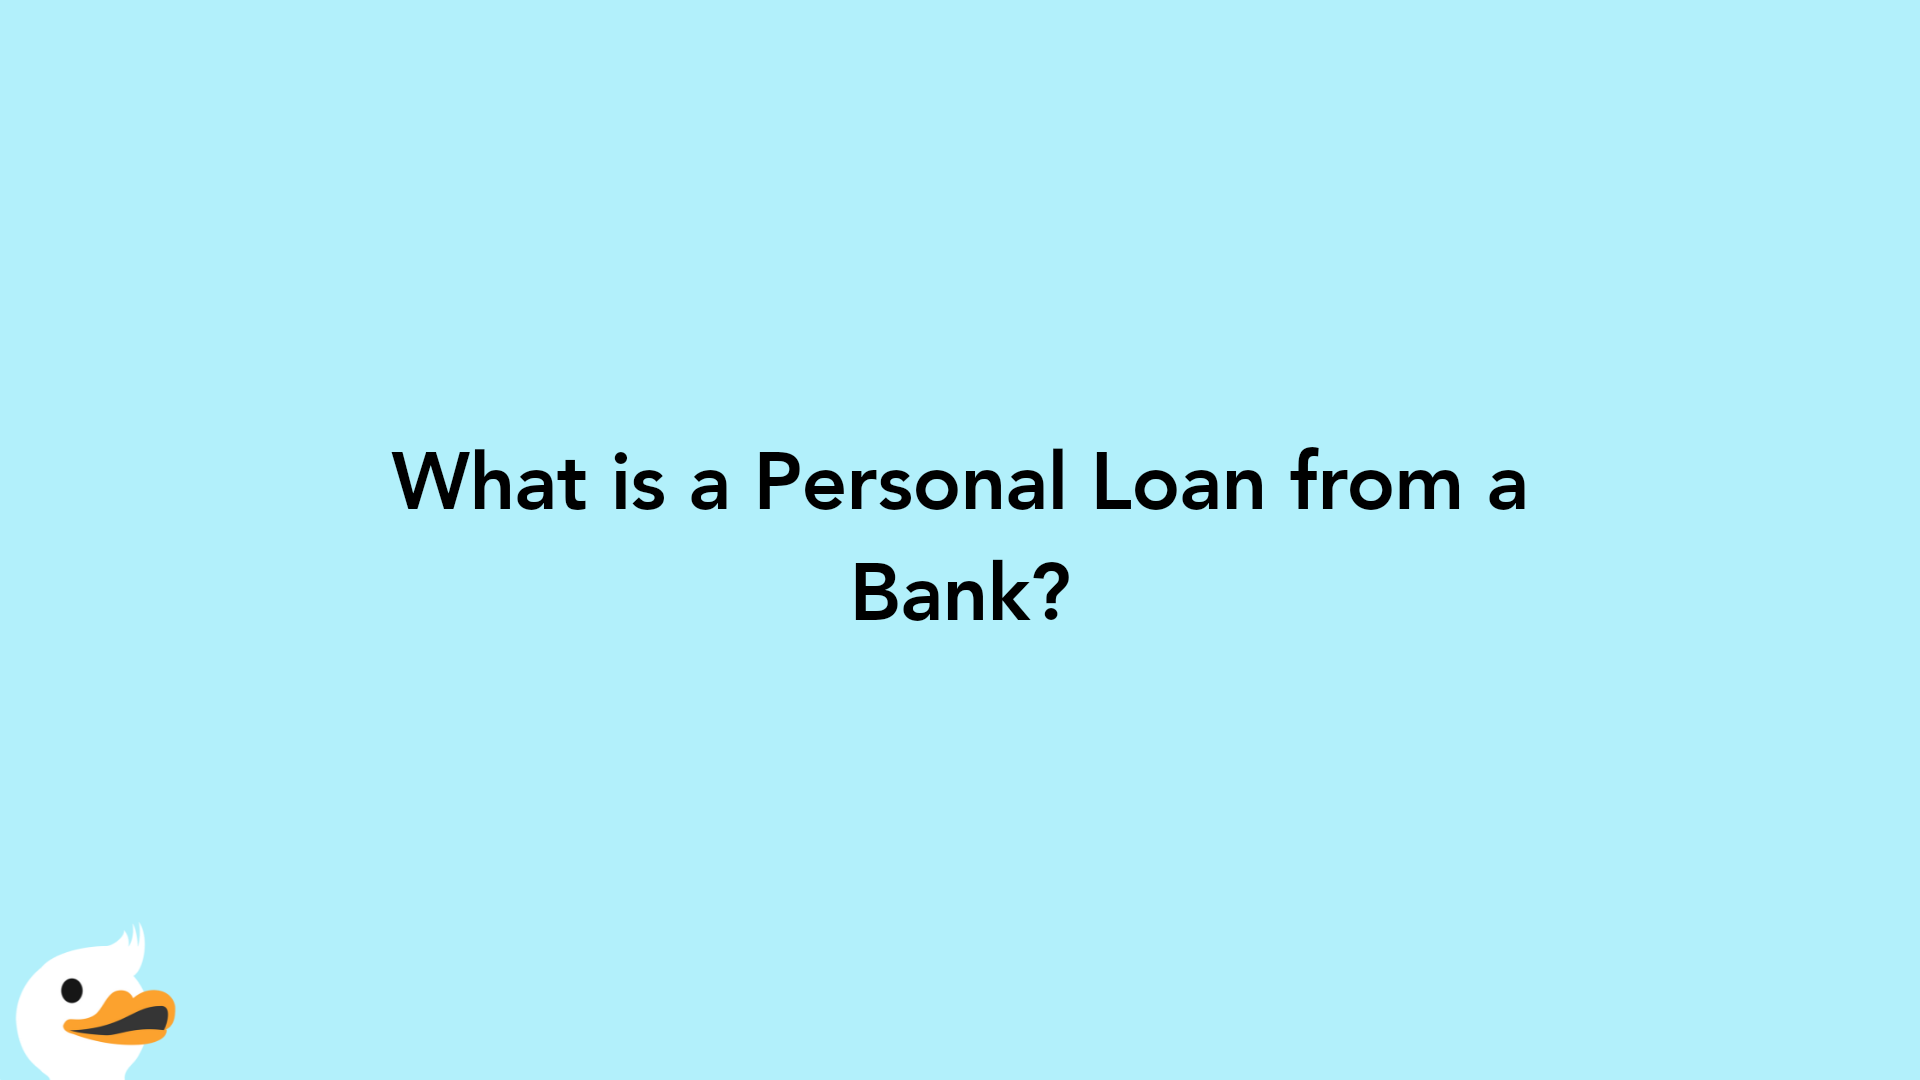 What is a Personal Loan from a Bank?